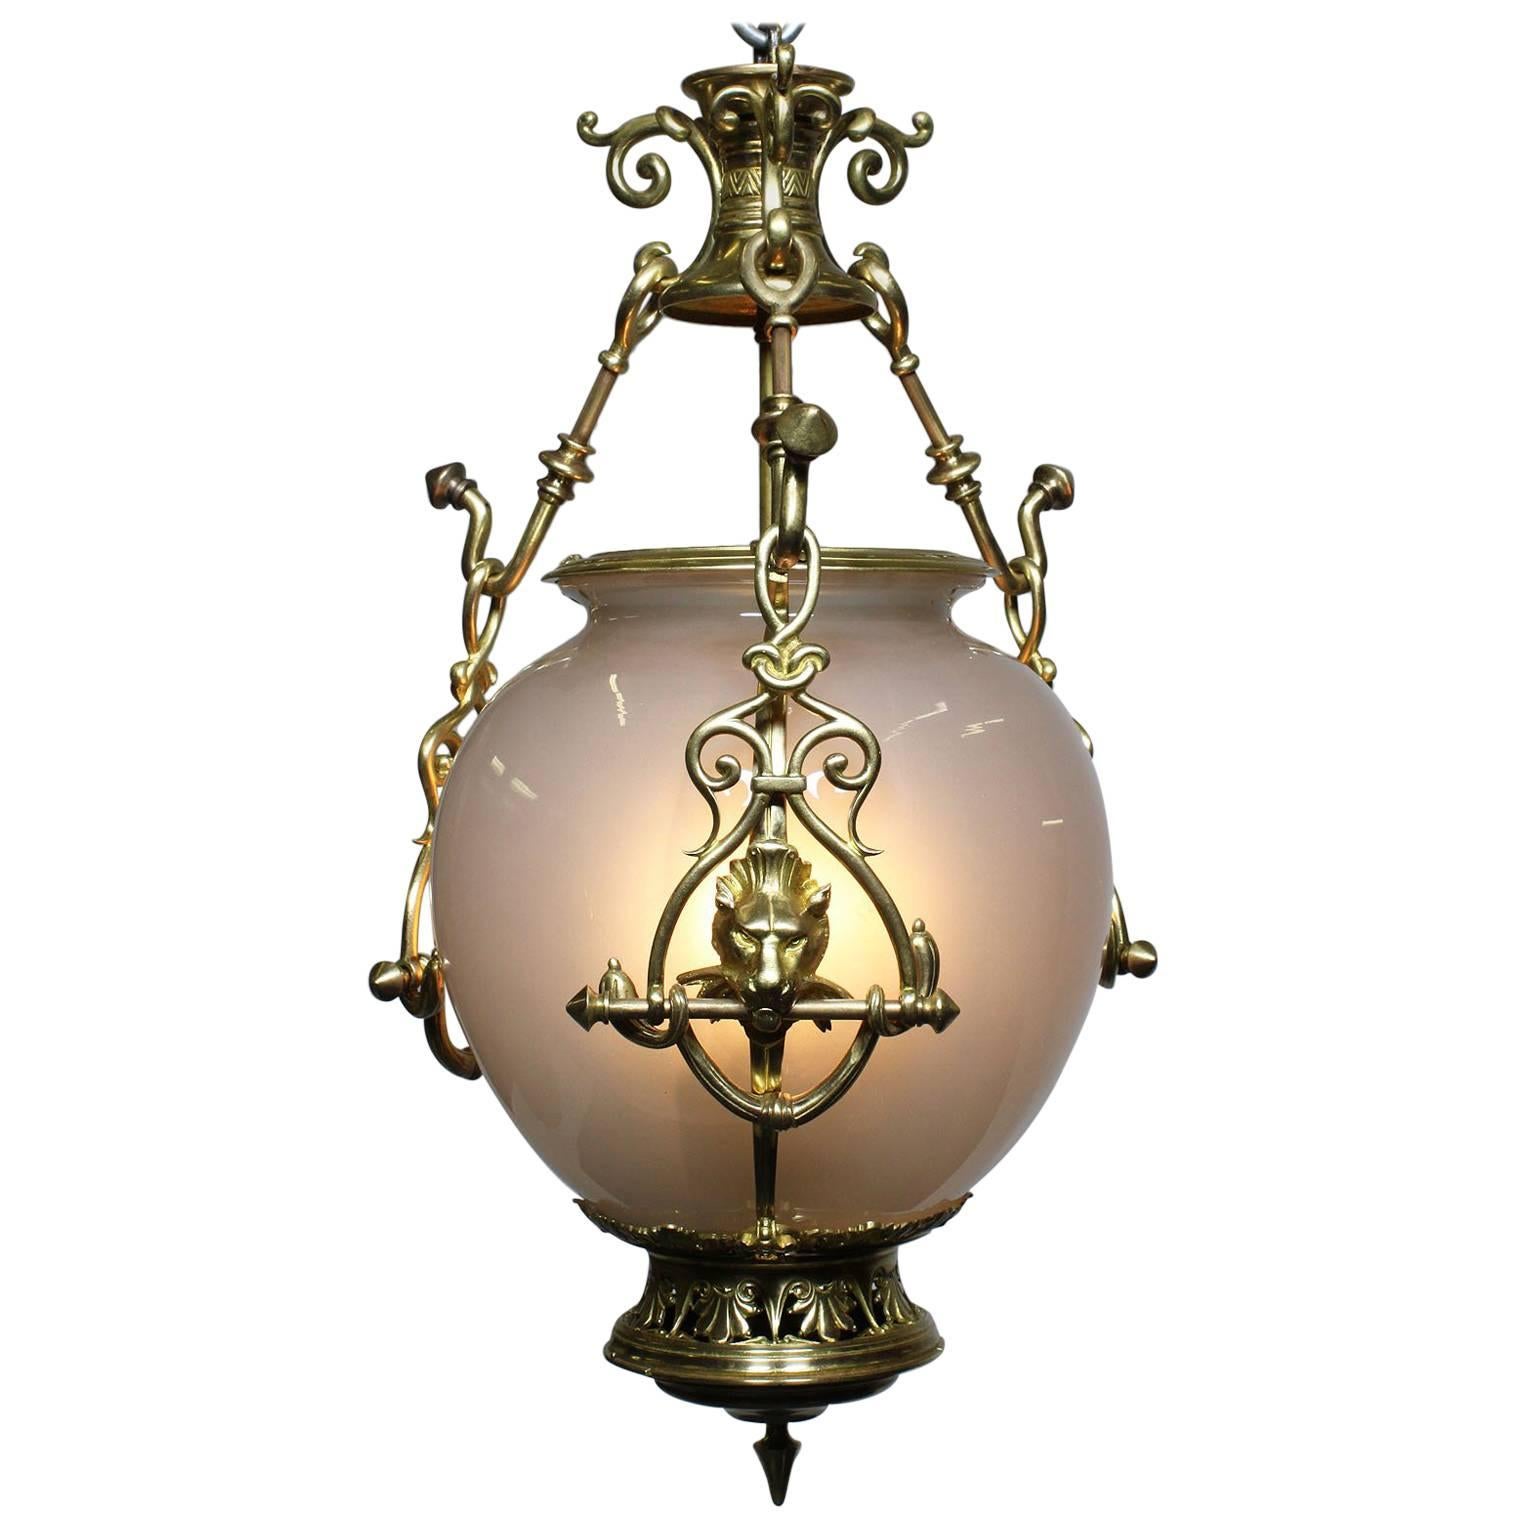 Early 20th Century Gilt-Bronze and Opaline Glass Hanging Lantern with Lion Pelts For Sale